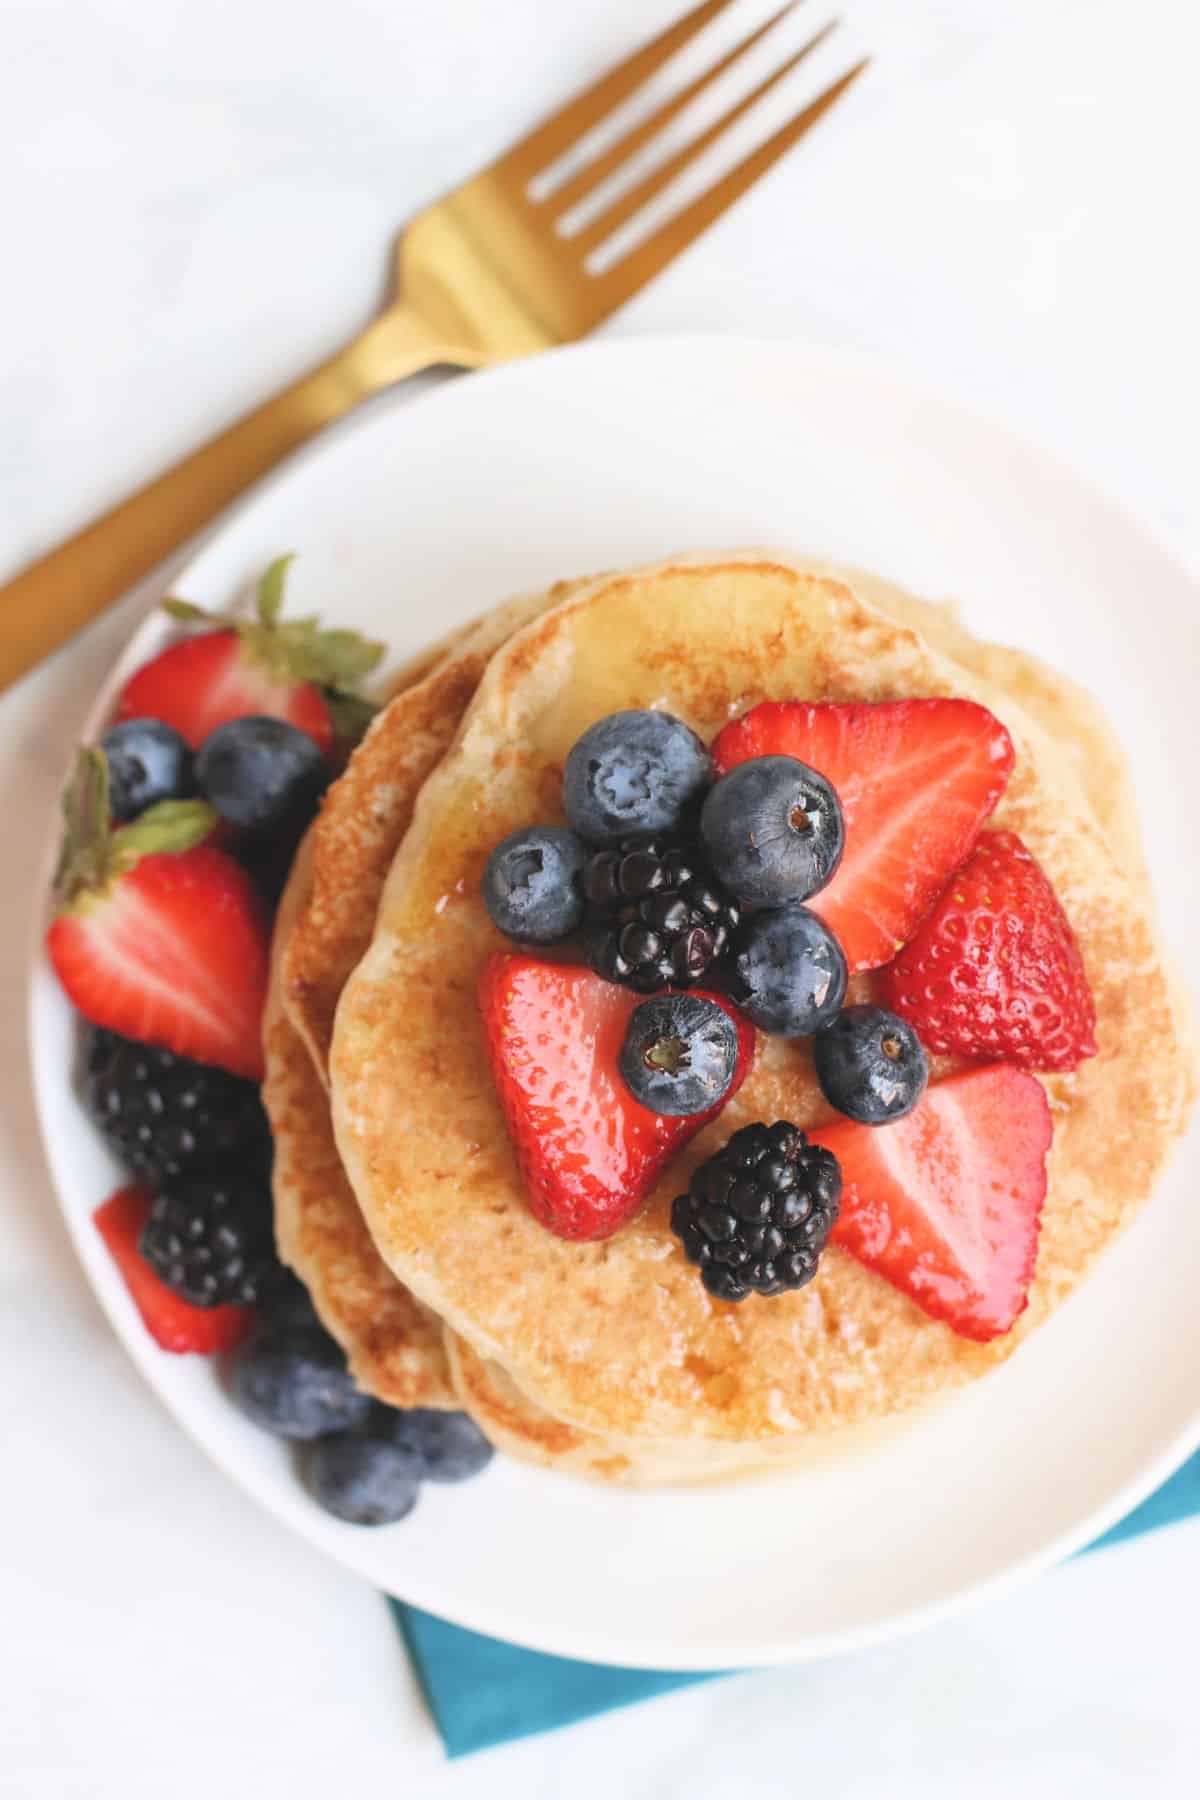 Overhead of plate of pancakes topped with blueberries, strawberries, and blackberries